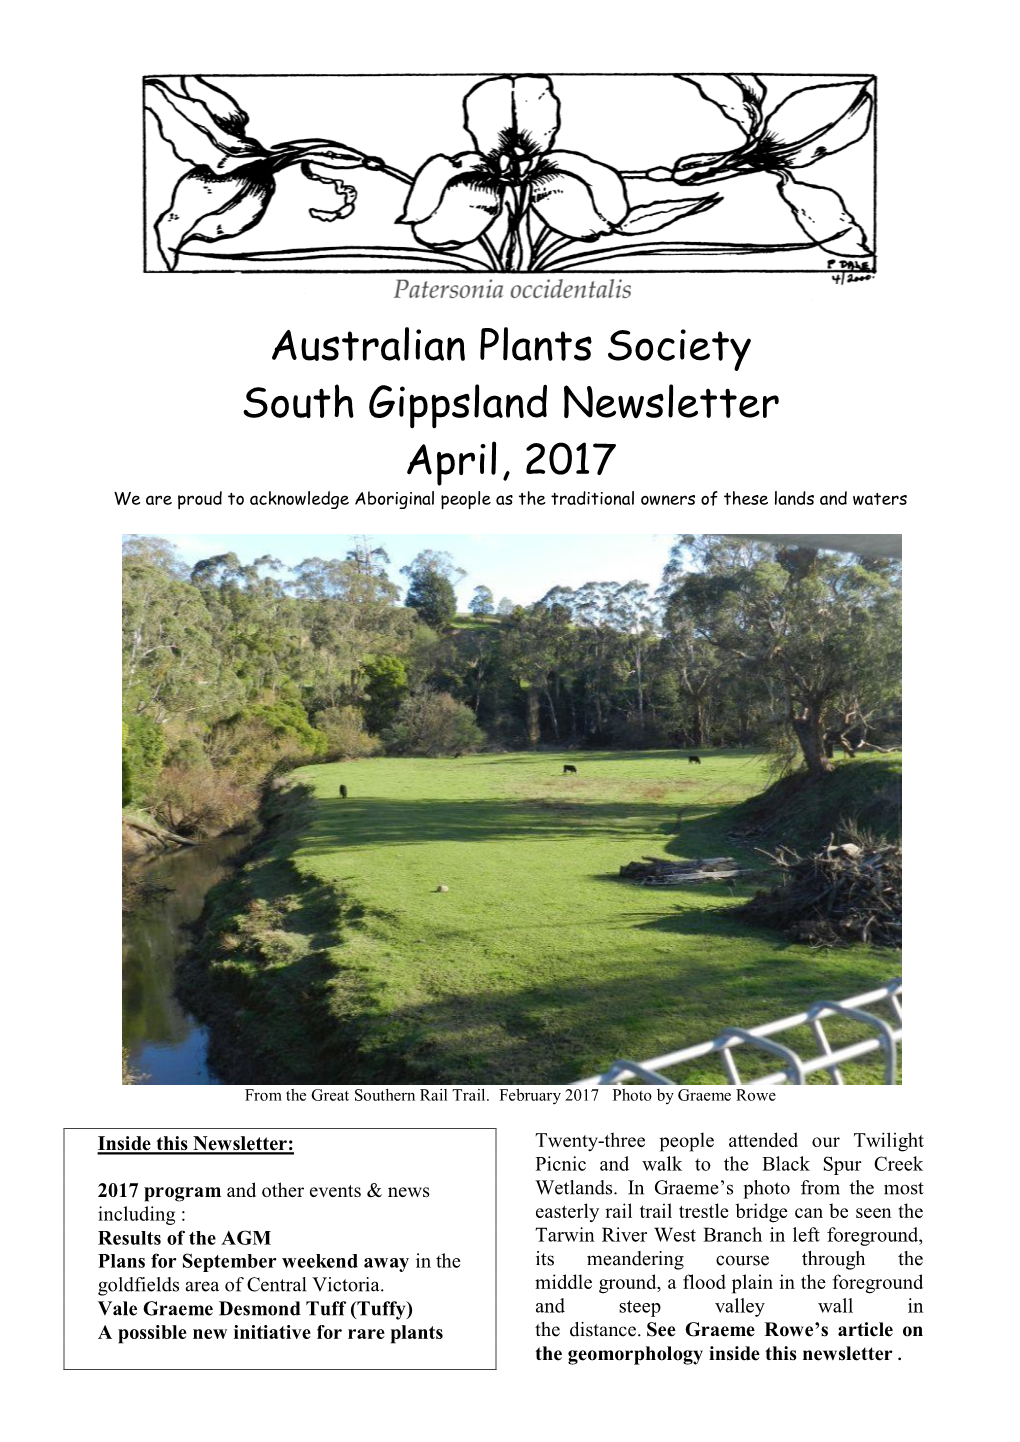 Australian Plants Society South Gippsland Newsletter April, 2017 We Are Proud to Acknowledge Aboriginal People As the Traditional Owners of These Lands and Waters